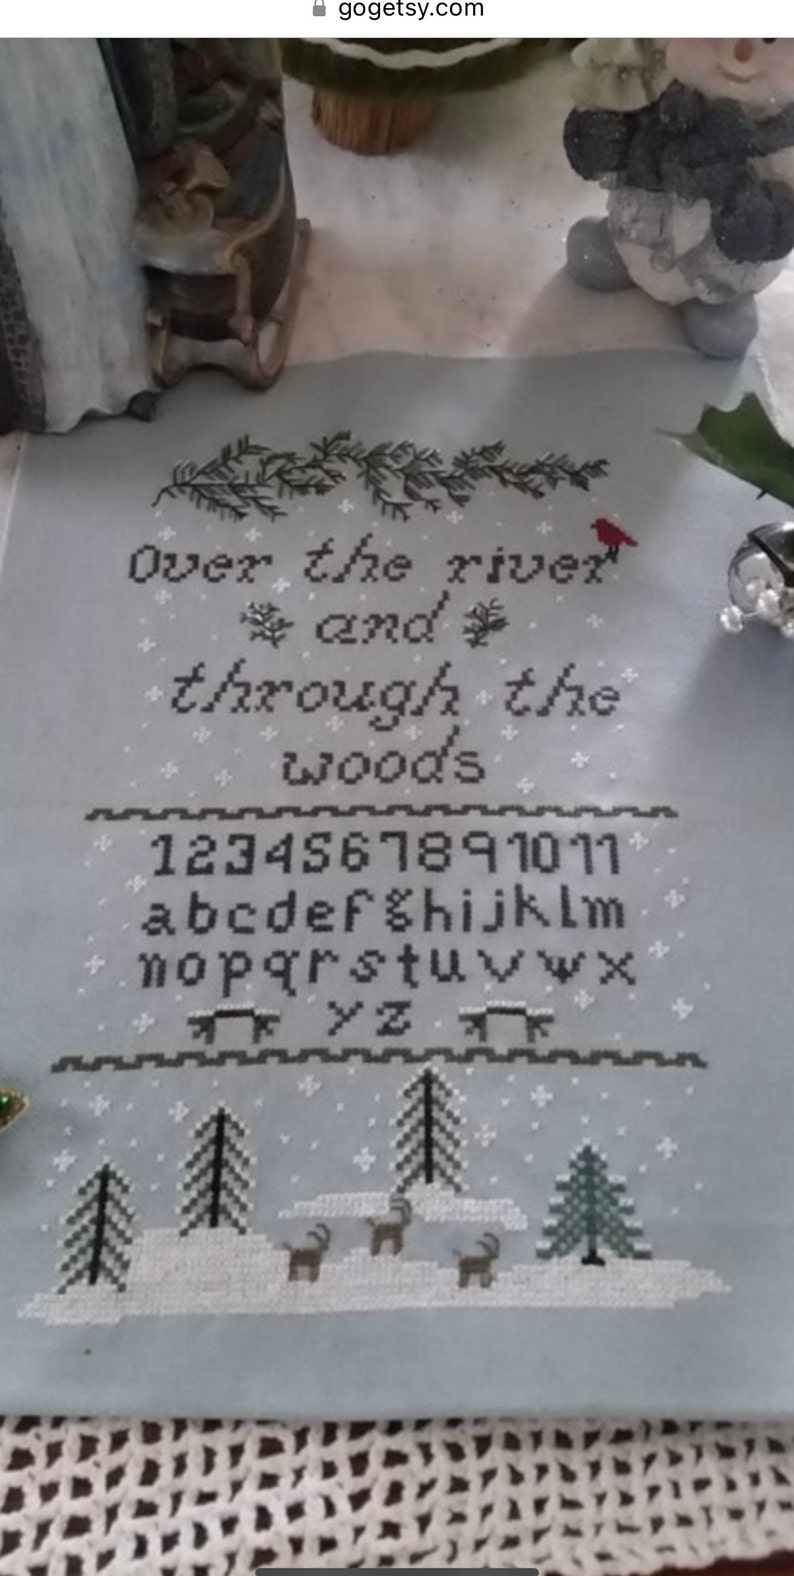 PDF, Over the River and through the Woods, Poem by Lydia Maria Child in 1844, Sampler pattern, Cross Stitch, Christmas, PDF, Deer and Snow image 9